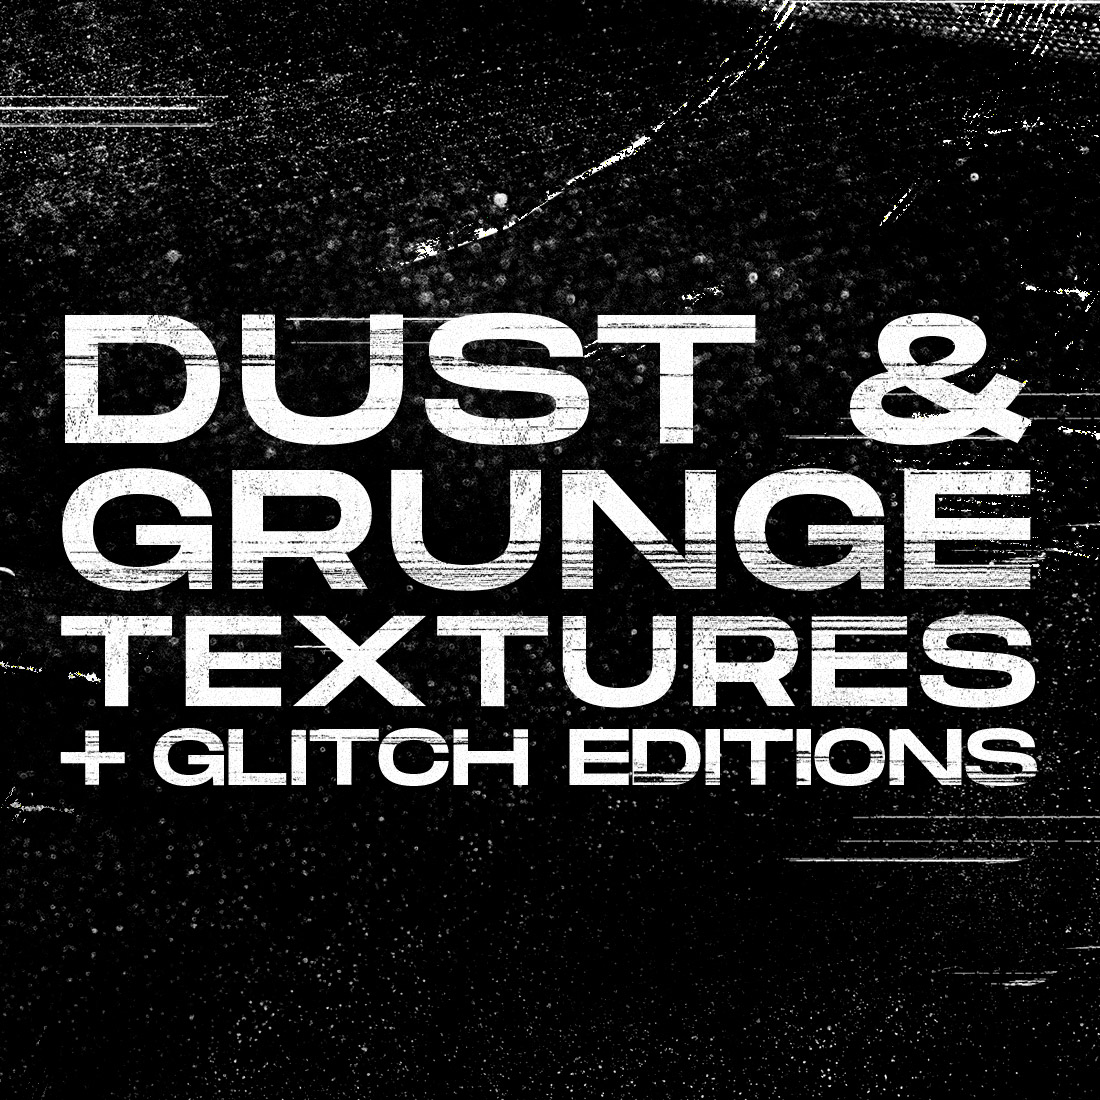 Dust Grunge Textures and Glitch Editions cover image.